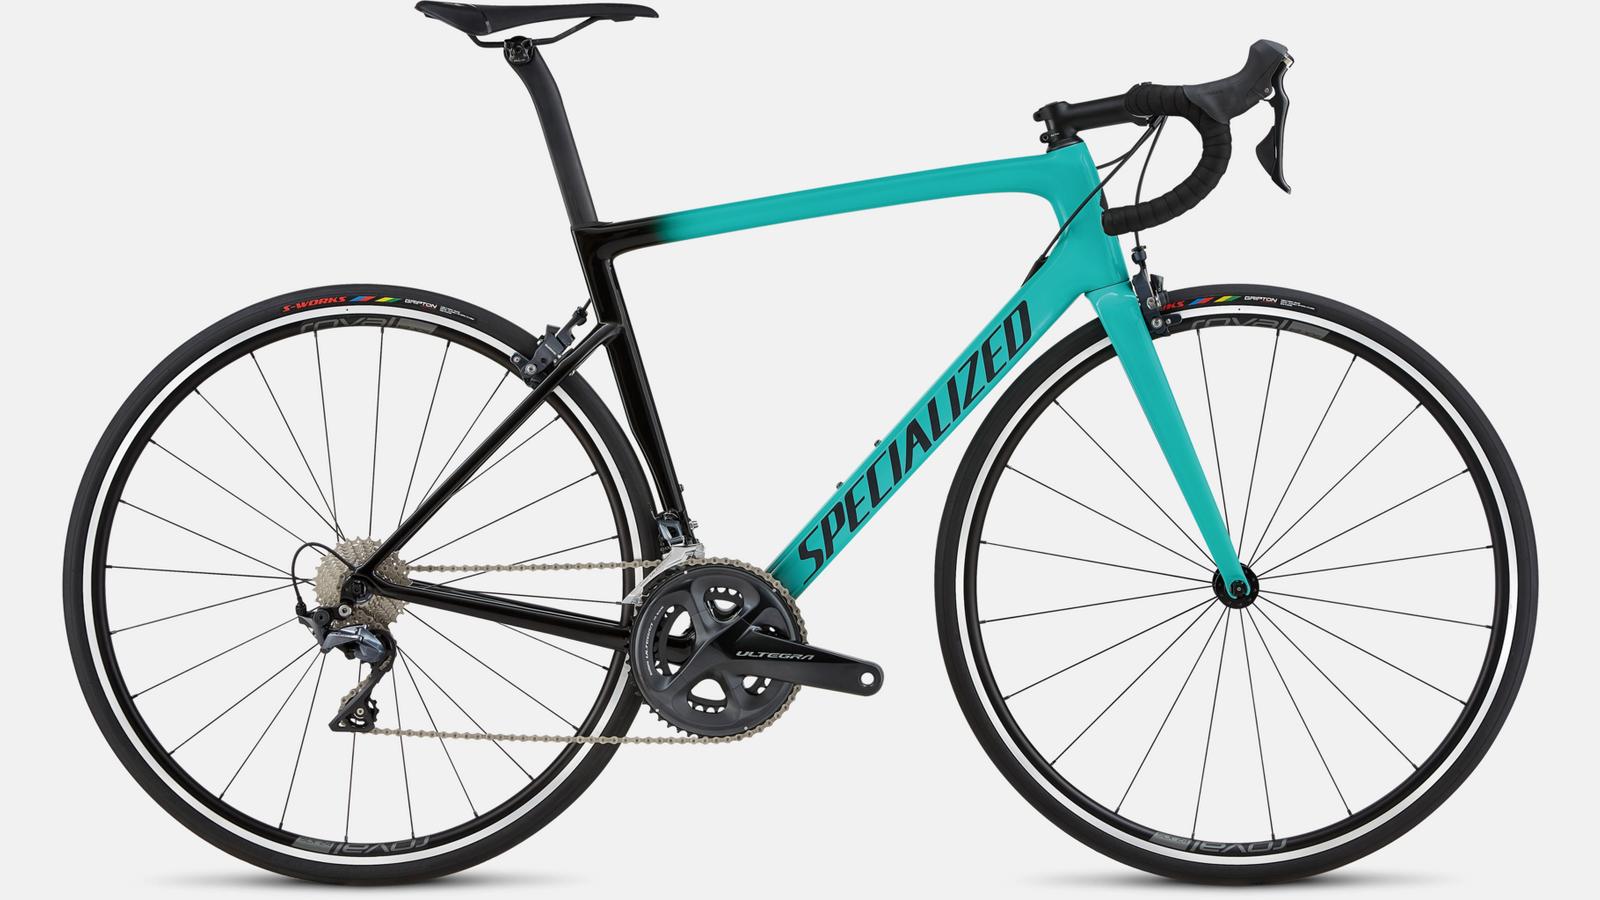 Paint for 2018 Specialized Men's Tarmac Expert - Gloss Acid Mint